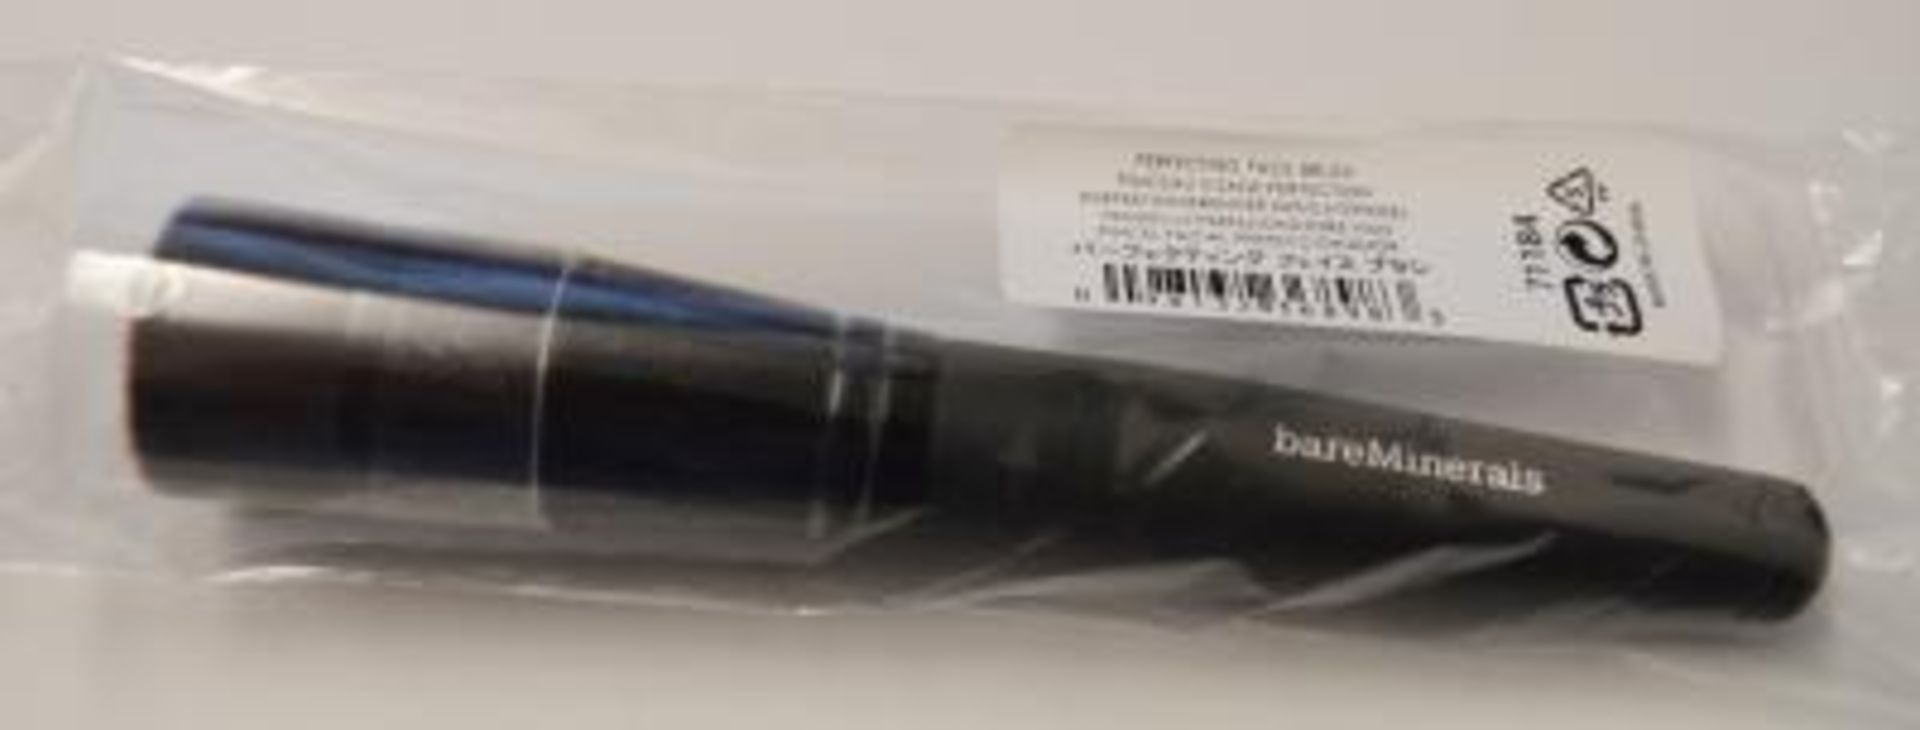 1 x Bare Escentuals bareMinerals “BARESKIN” Perfecting Face Brush - Genuine Product - Brand New - Image 2 of 3